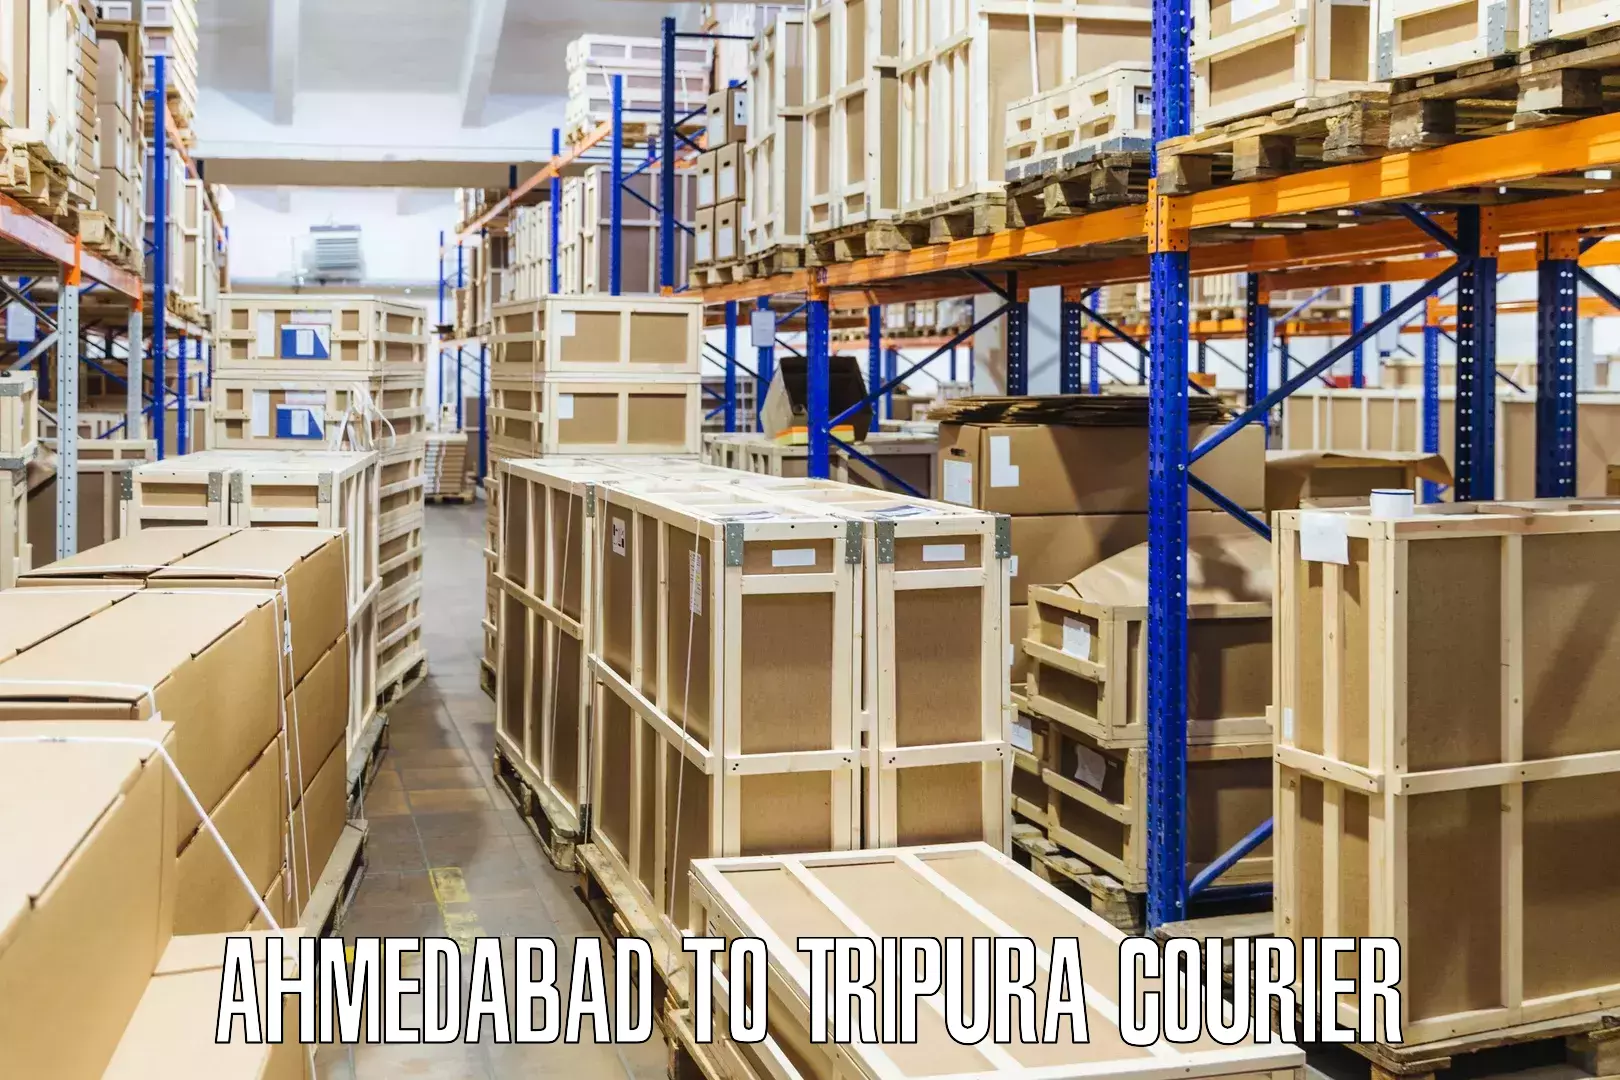 Express package services Ahmedabad to Udaipur Tripura